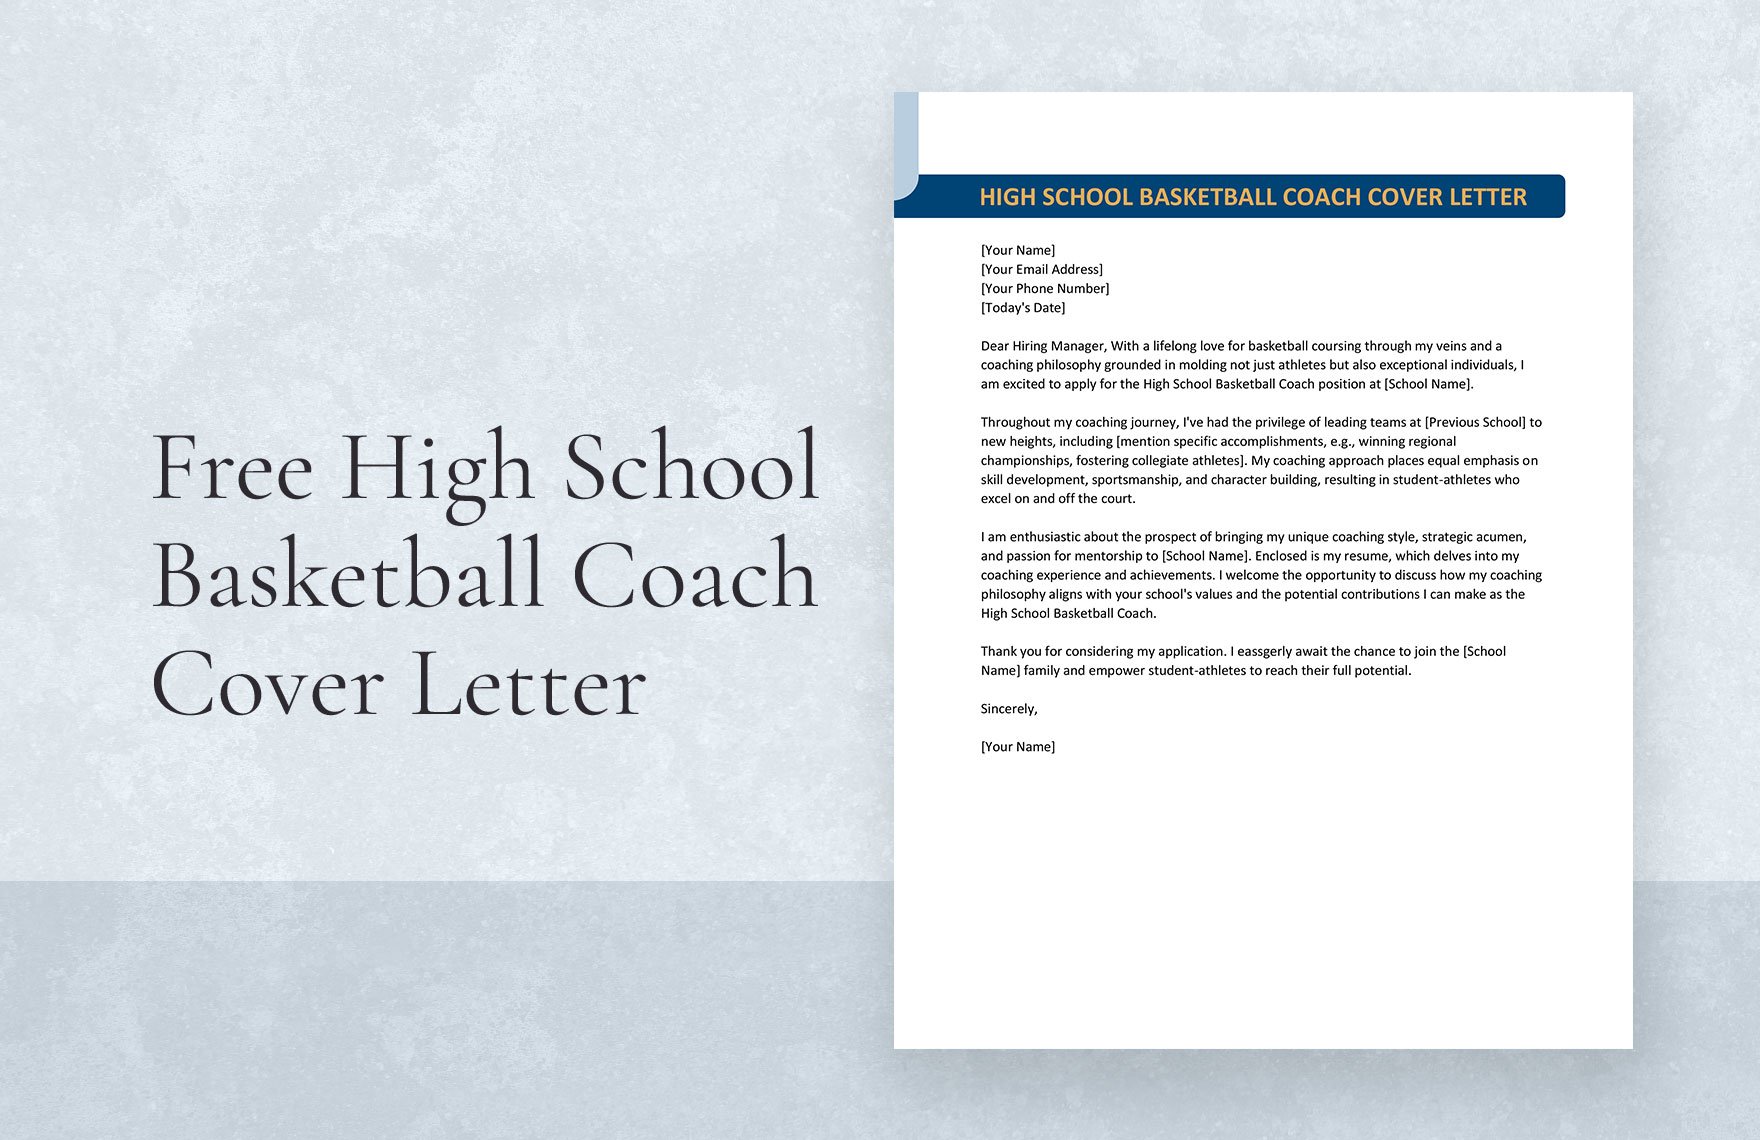 High School Basketball Coach Cover Letter in Word, Google Docs